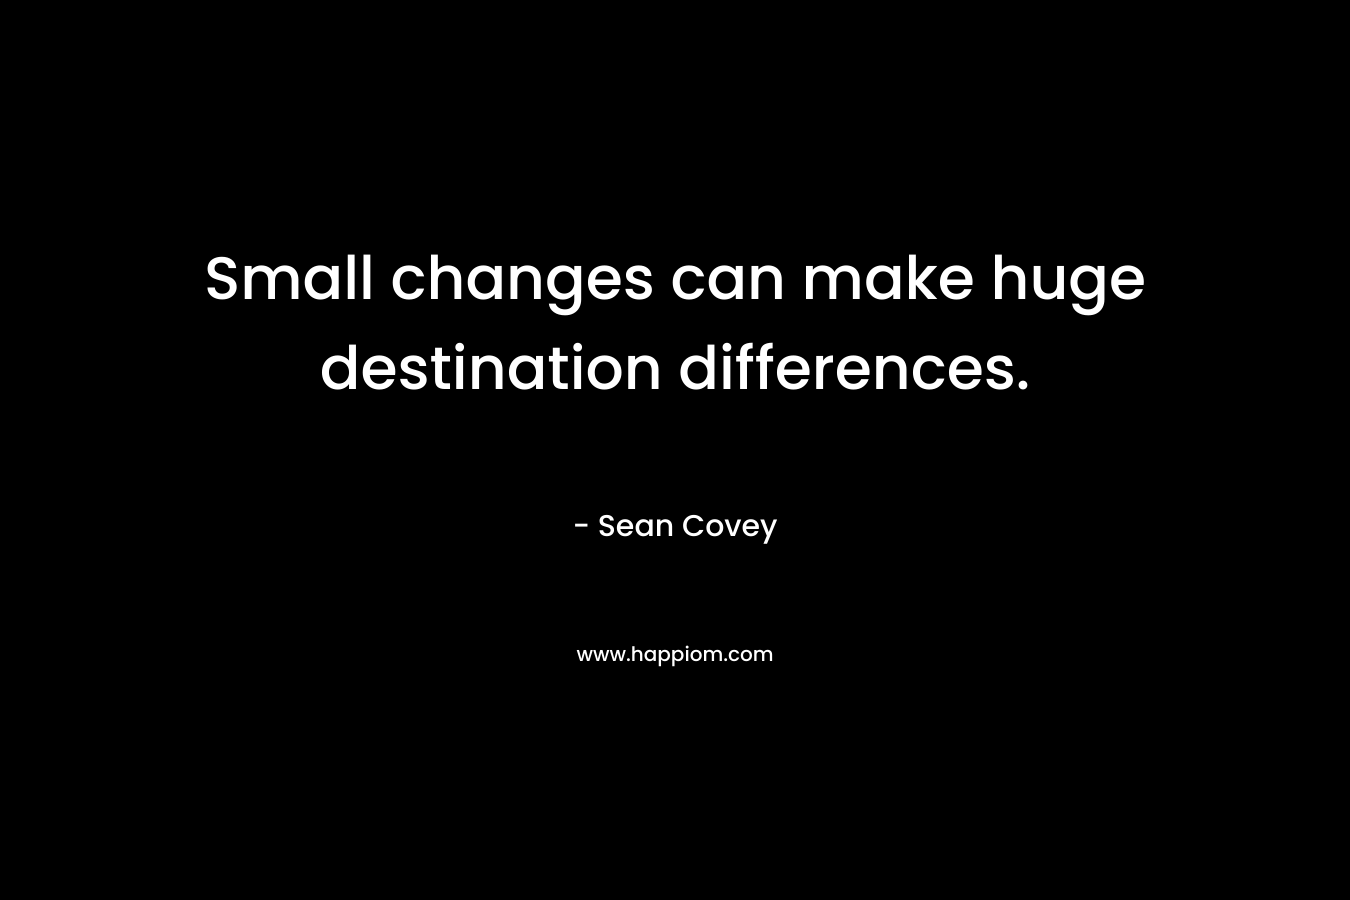 Small changes can make huge destination differences.